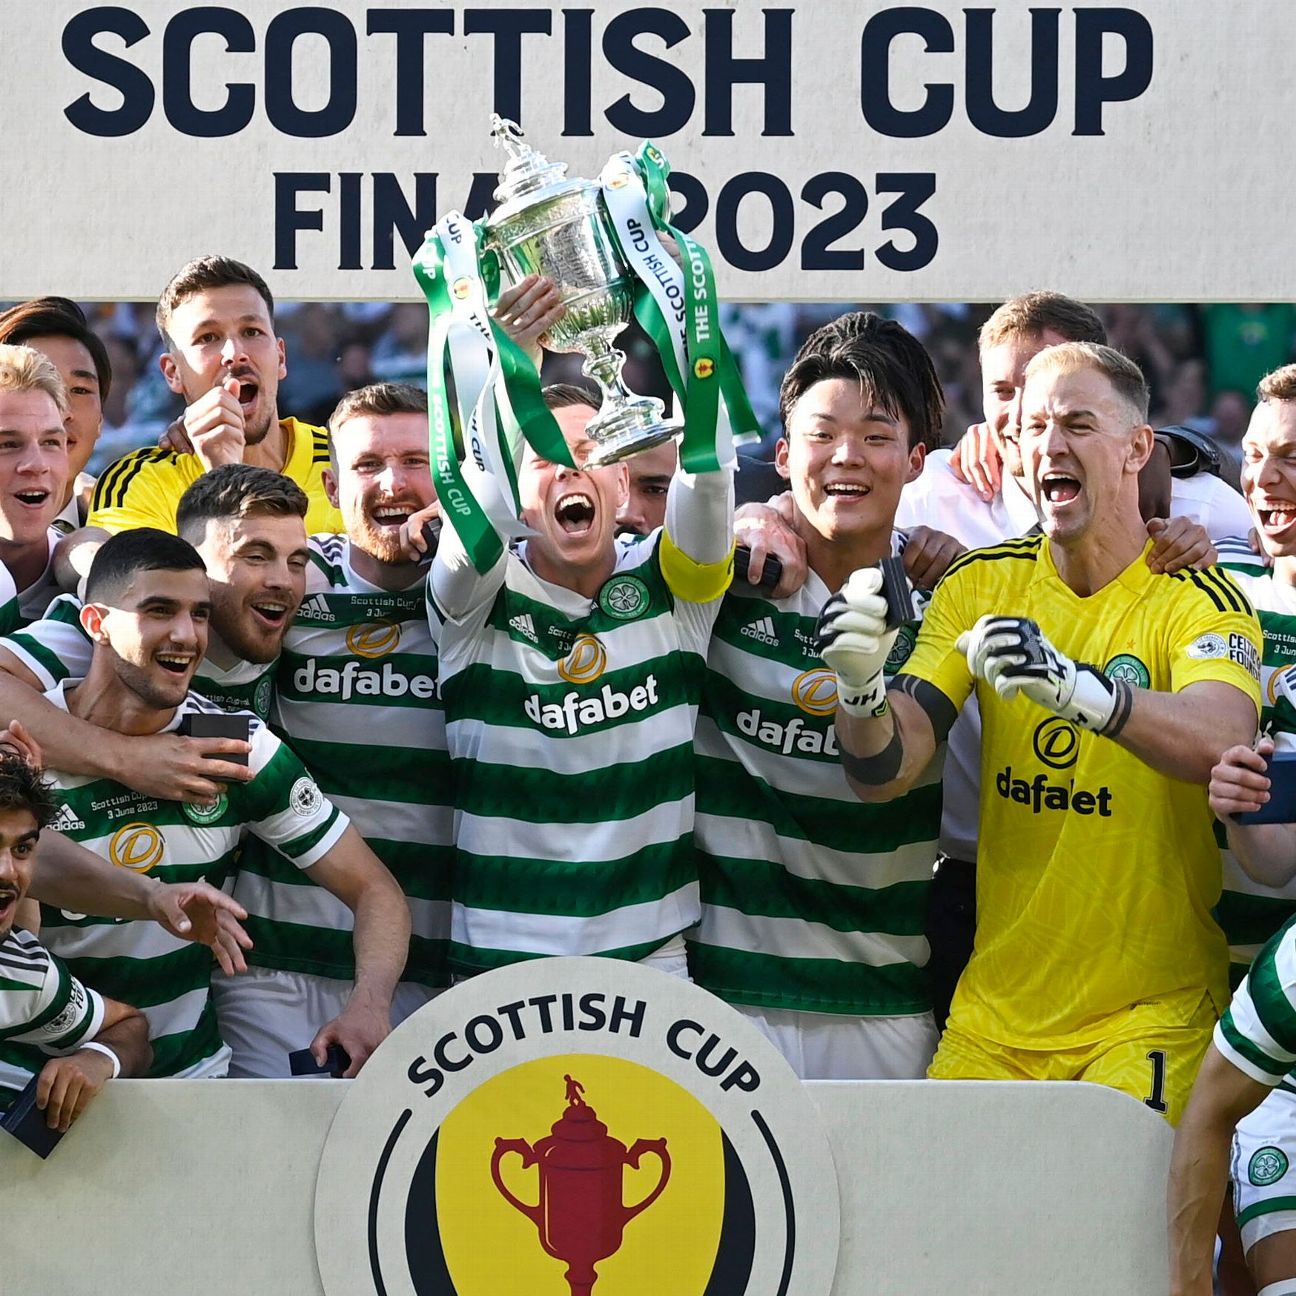 Celtic complete world-record eighth treble 